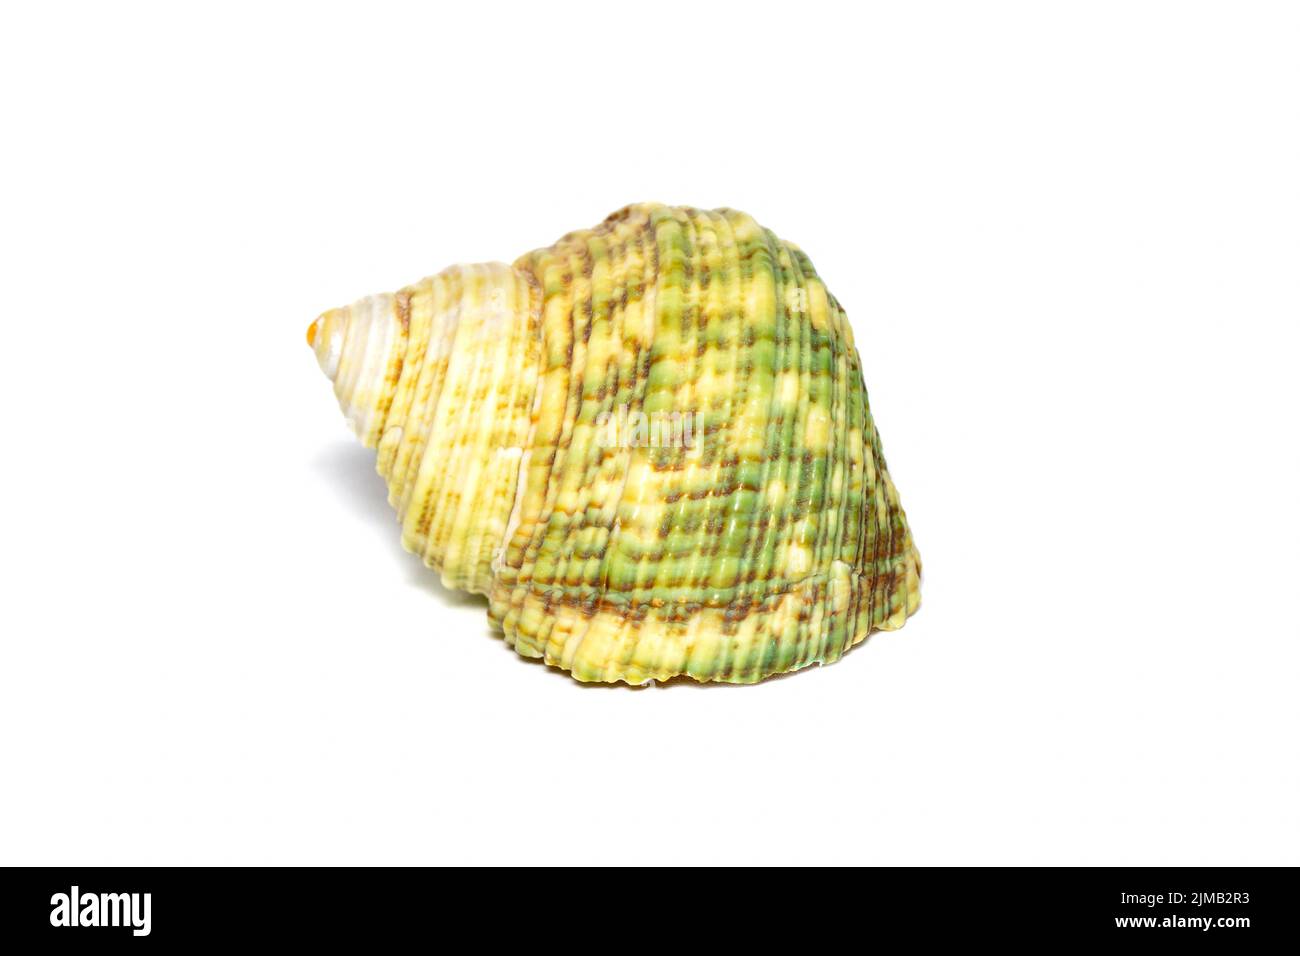 Image of green turbo sea shell on a white background. Undersea Animals. Sea shells. Stock Photo